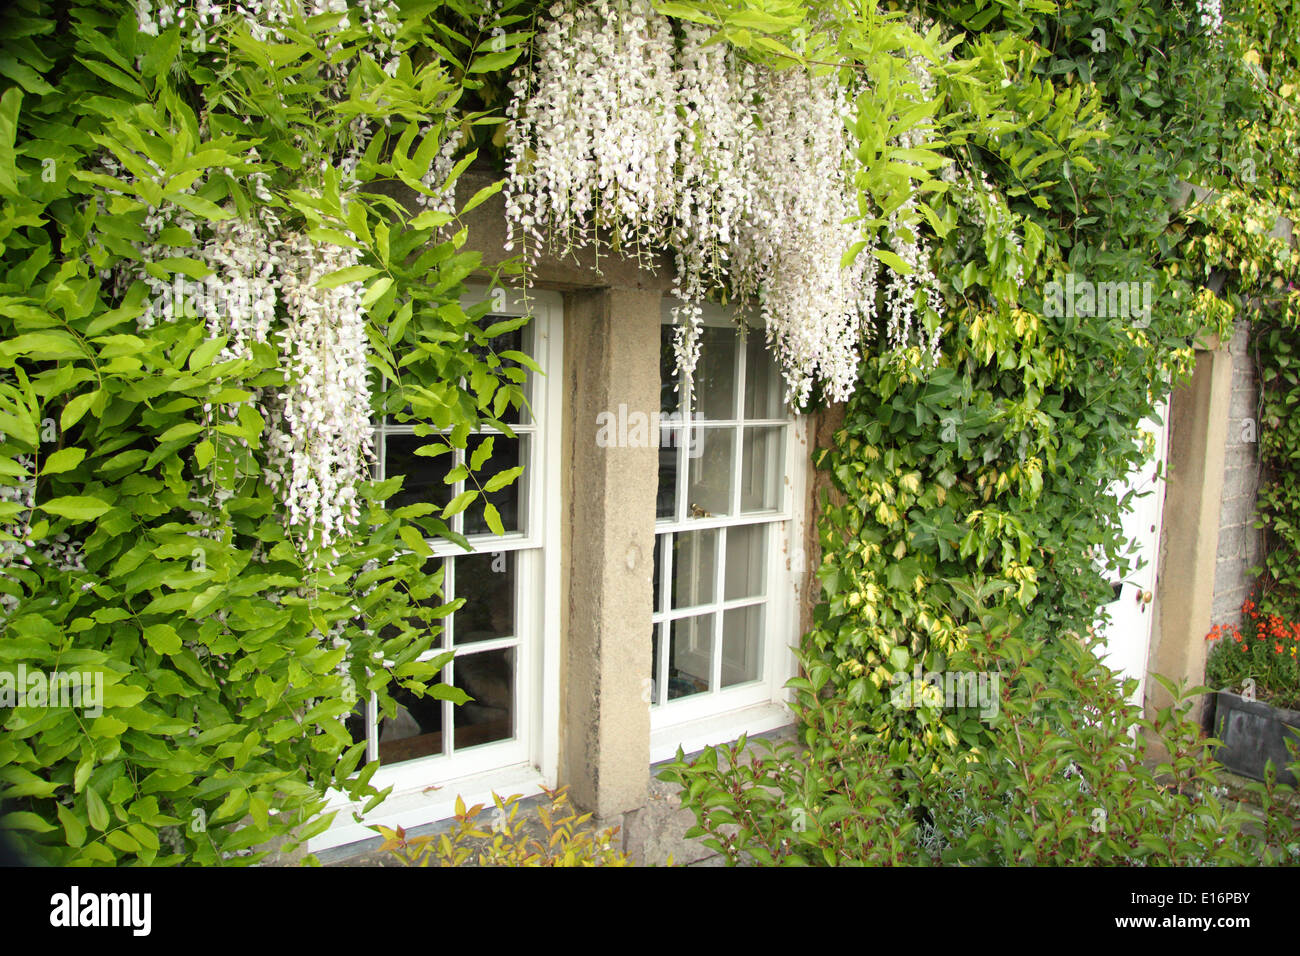 Wisteria sinensis Alba - Chinese wisteria frames the windows of an English country cottage, Stock Photo